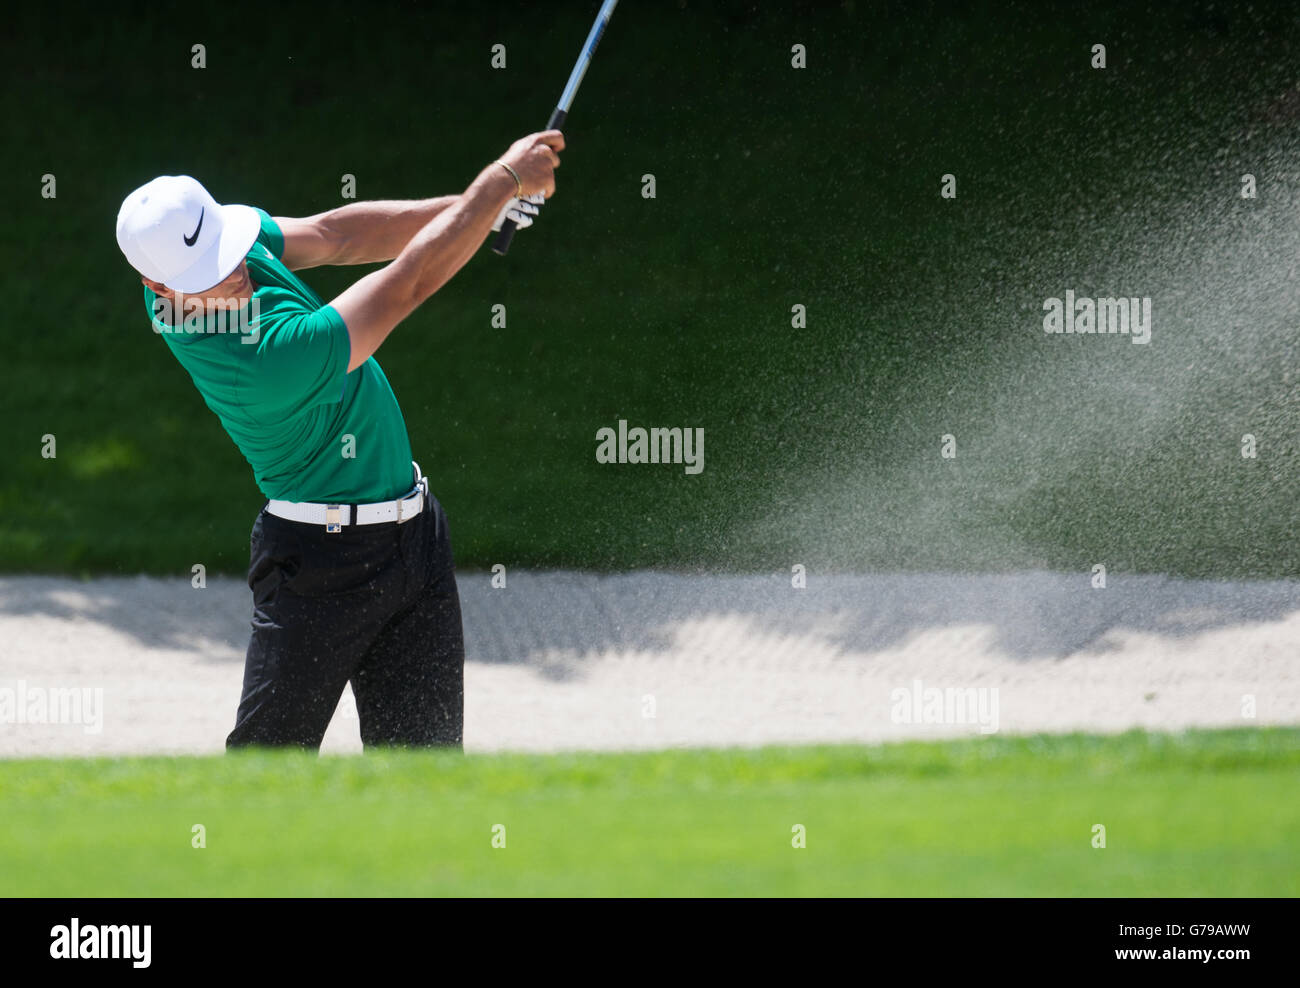 Pulheim, Germany. 26th June, 2016. Denmark's Thorbjorn Olesen in action at the Golf International Open in Pulheim, Germany, 26 June 2016. Photo: BERND THISSEN/dpa/Alamy Live News Stock Photo